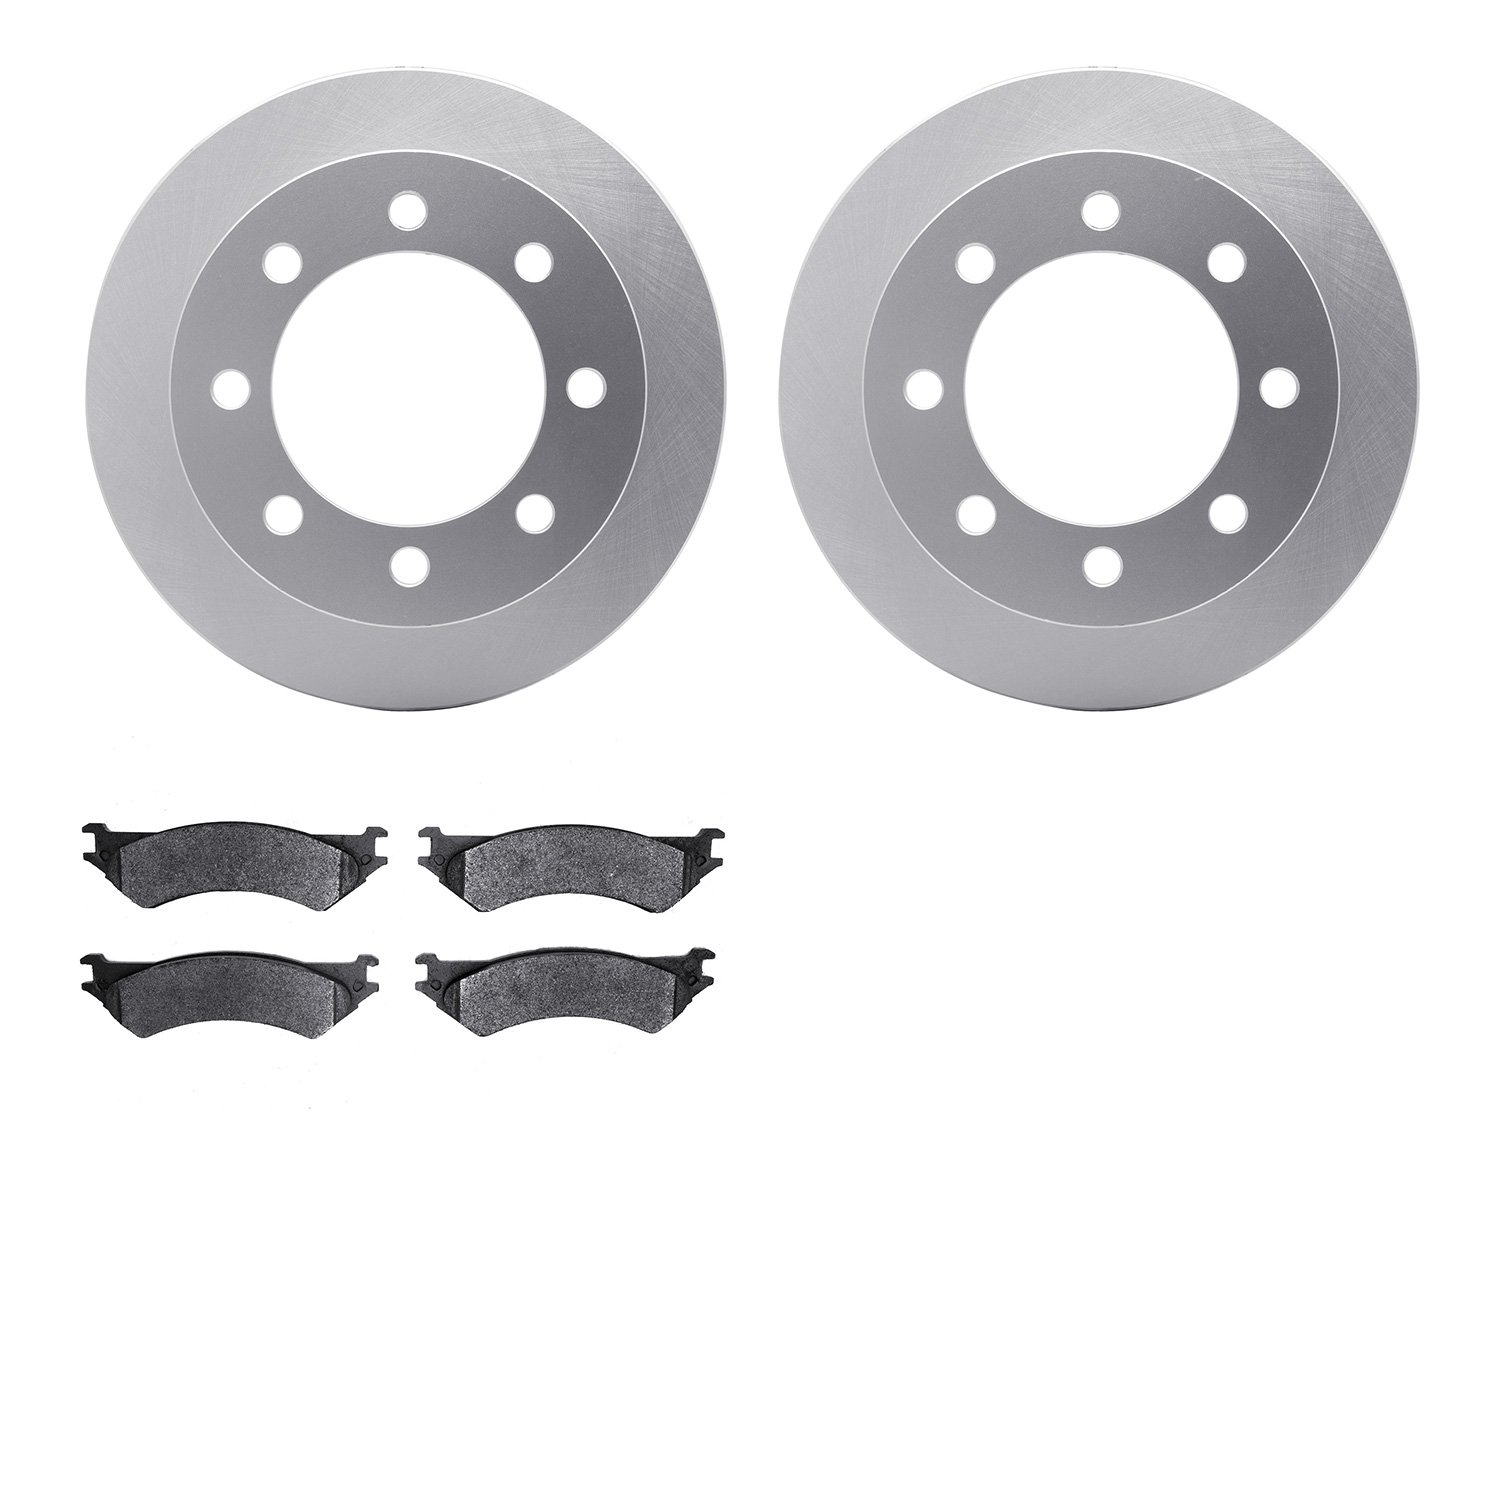 4402-54029 Geospec Brake Rotors with Ultimate-Duty Brake Pads Kit, 1999-2007 Ford/Lincoln/Mercury/Mazda, Position: Rear